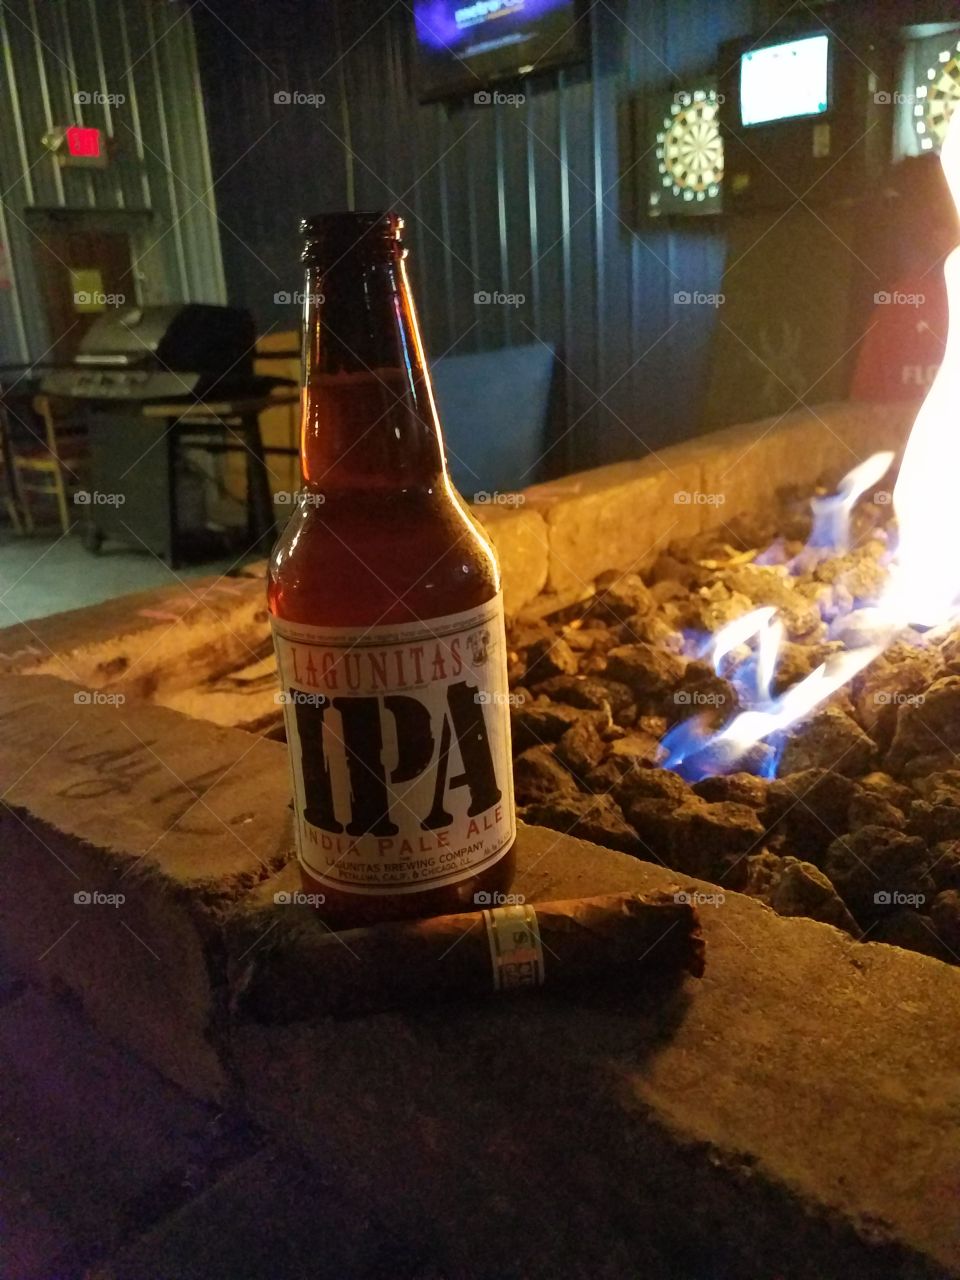 Good drink by the fire